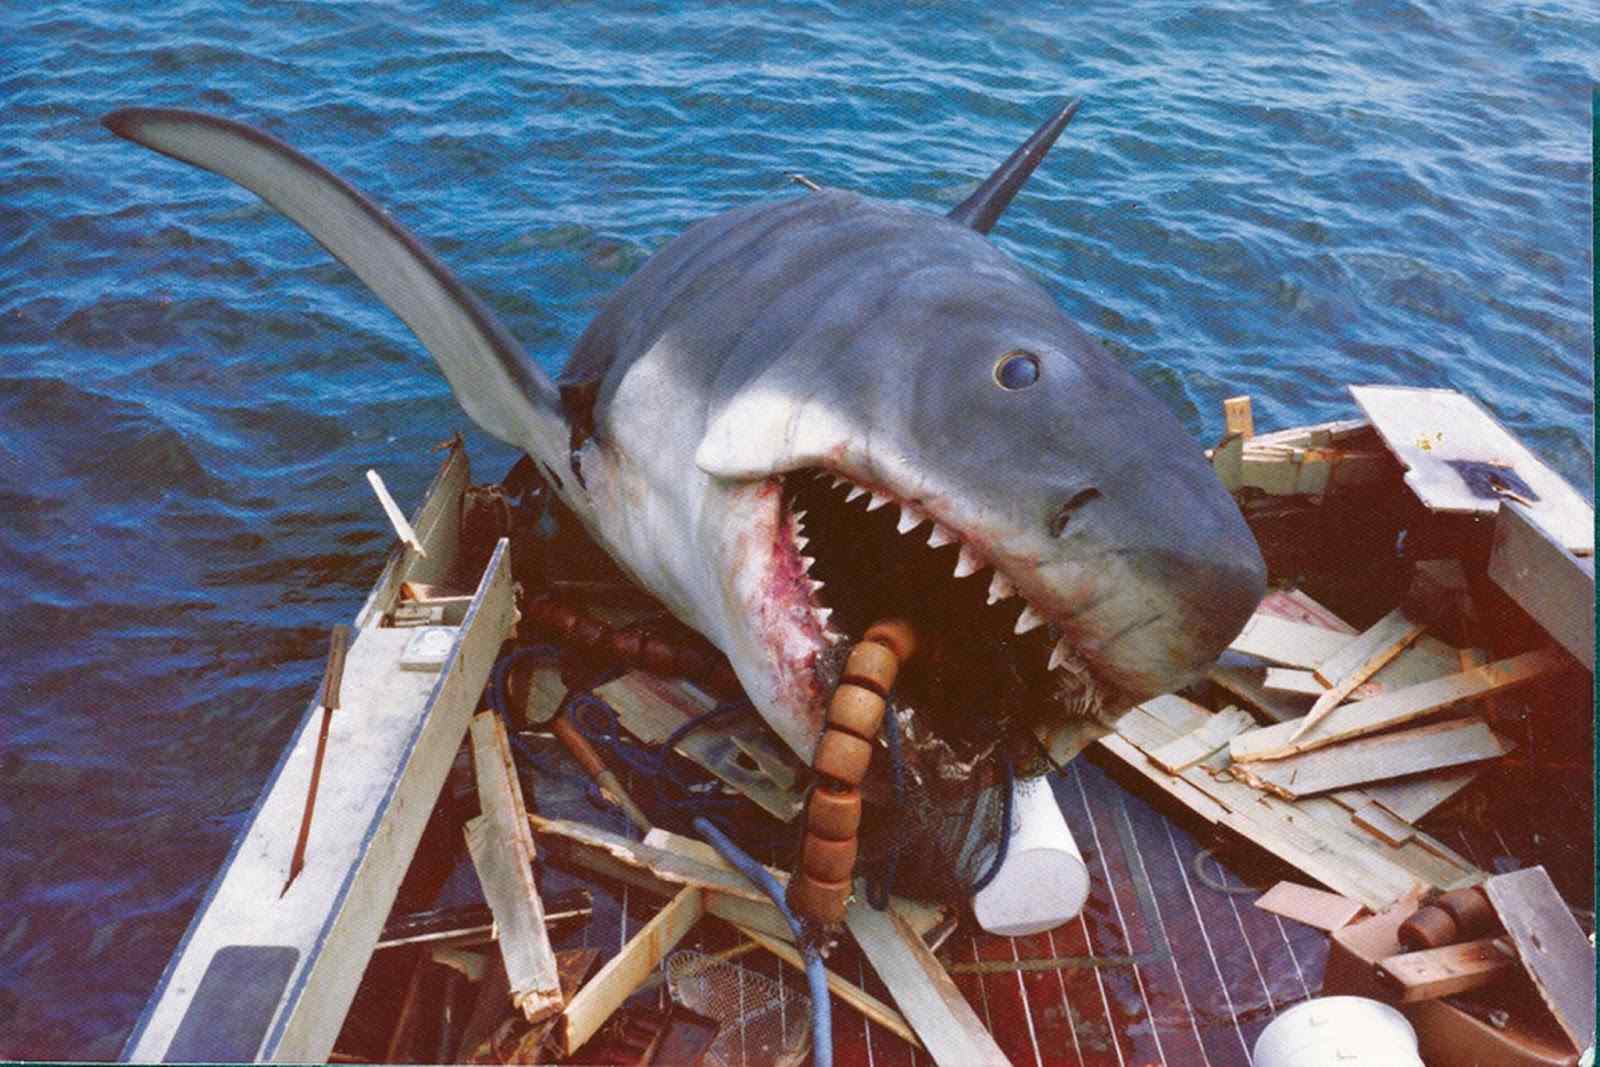 The movie poster for Jaws directed by Steven Spielberg.